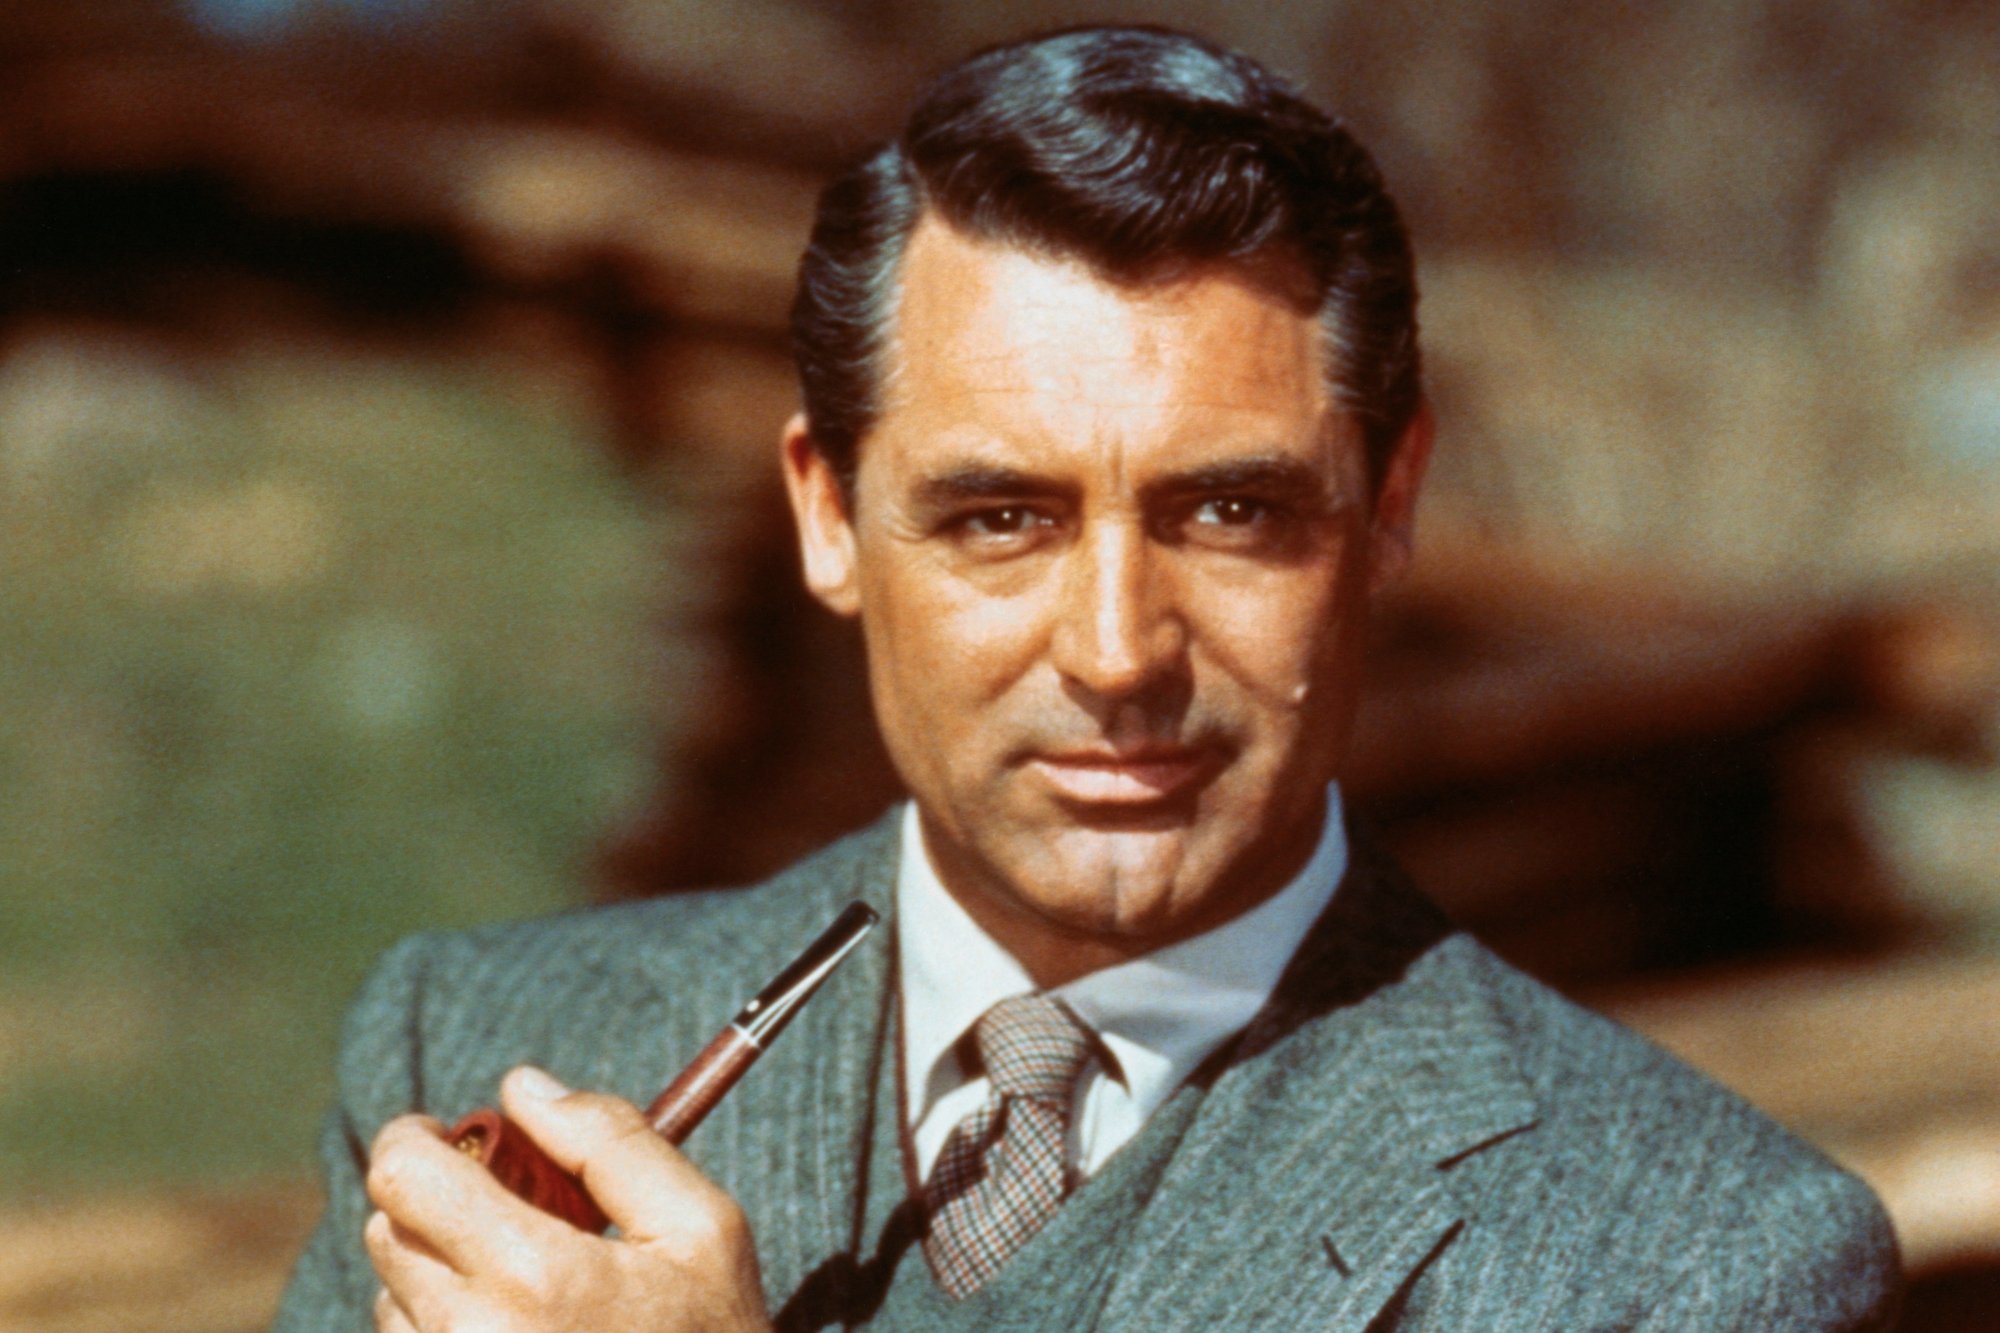 Cary Grant Turned Down ‘My Fair Lady’ Because ‘I Knew There Would Be Backlash’